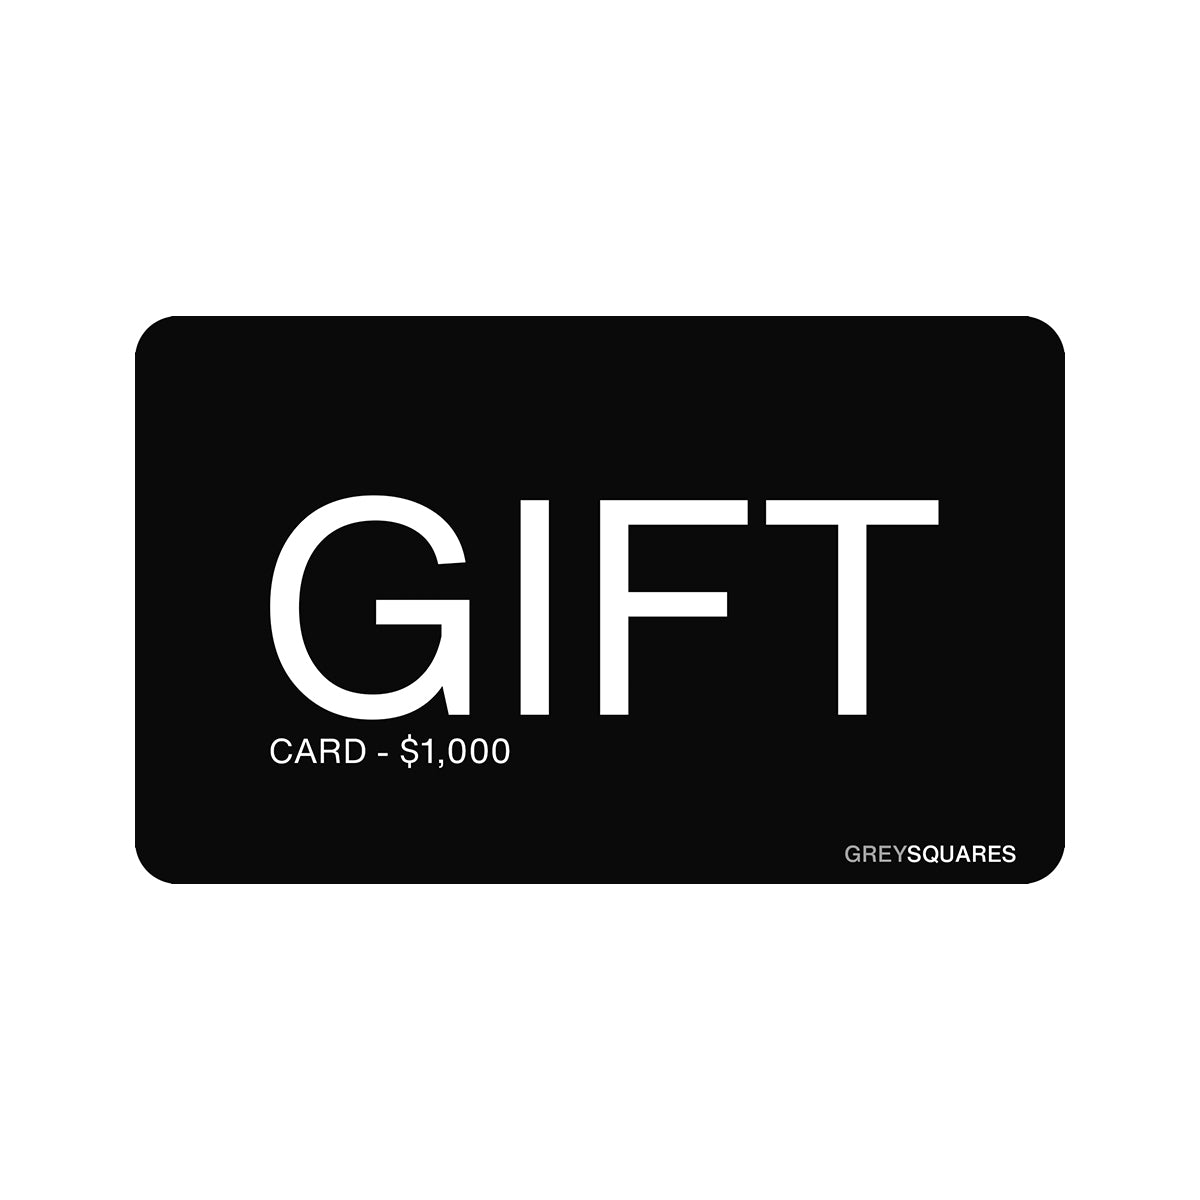 Gift Cards.